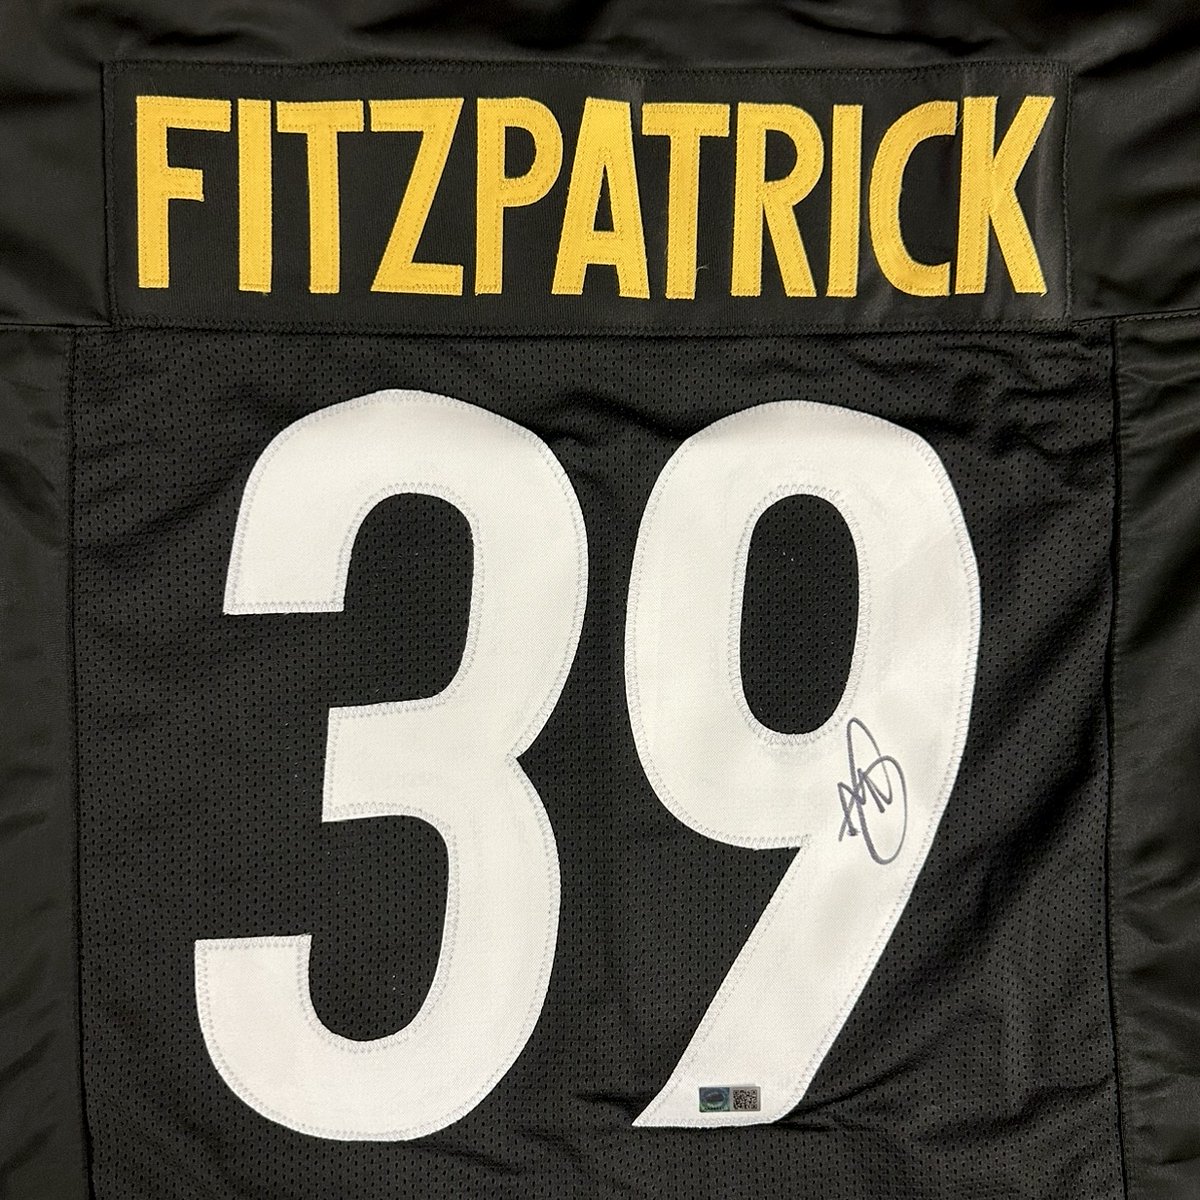 We're going to give a Minkah Fitzpatrick autographed jersey to someone who retweets this tweet and follows us! We'll pick a winner on Monday 8/21!